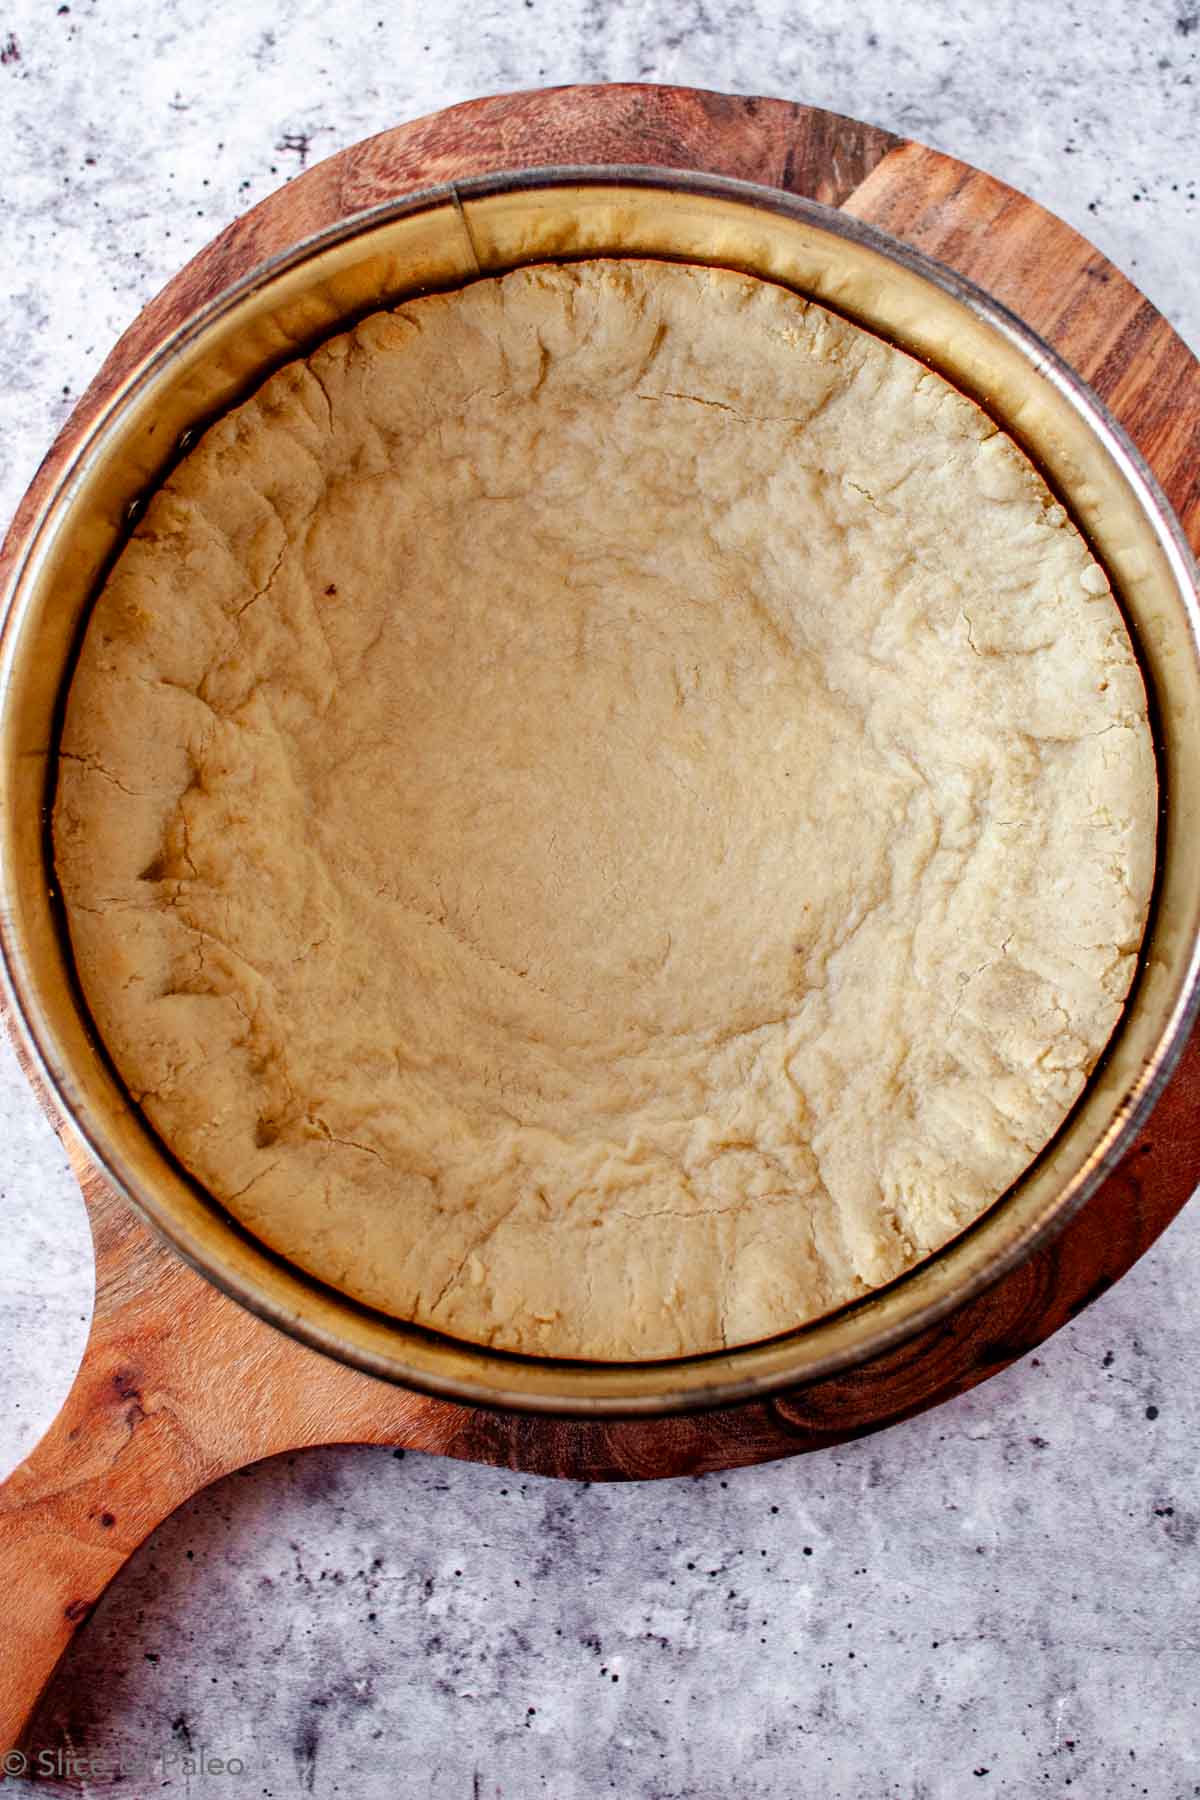 Paleo Chicago Style Deep Dish Pizza dough partially baked in a springform cake pan.